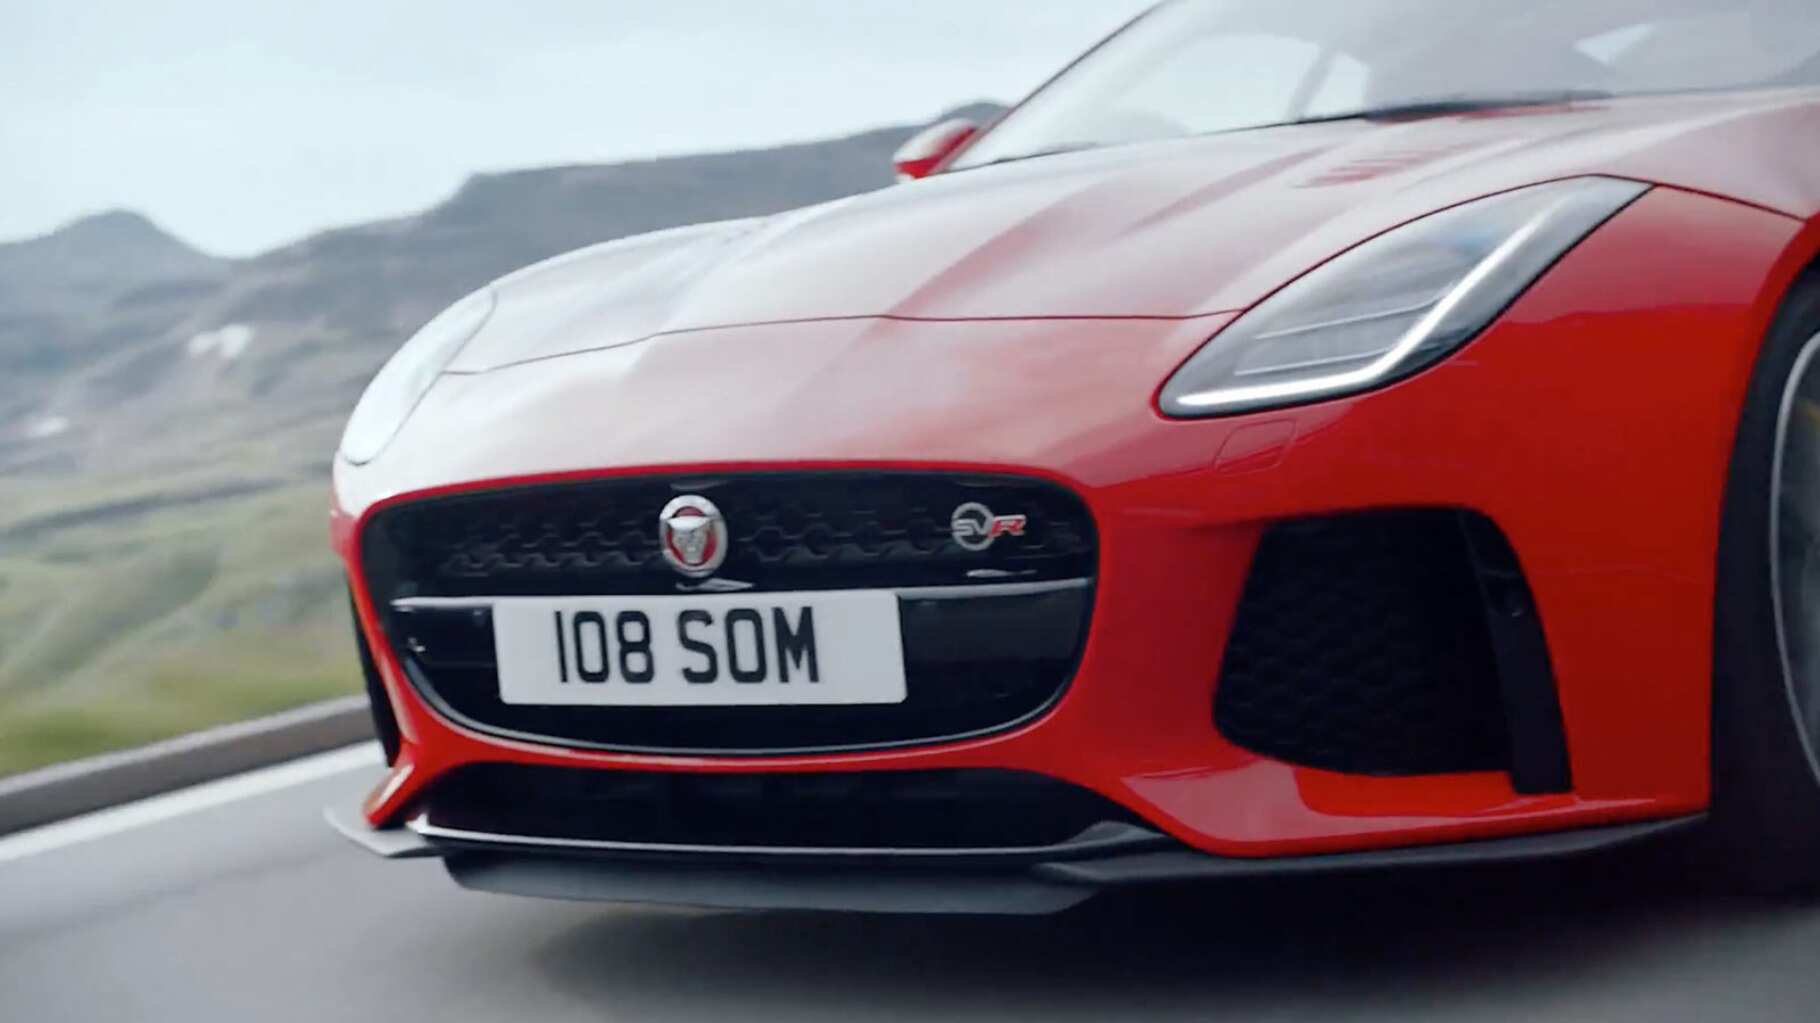 A close up of the front of a jaguar f-type as it drived along a road.